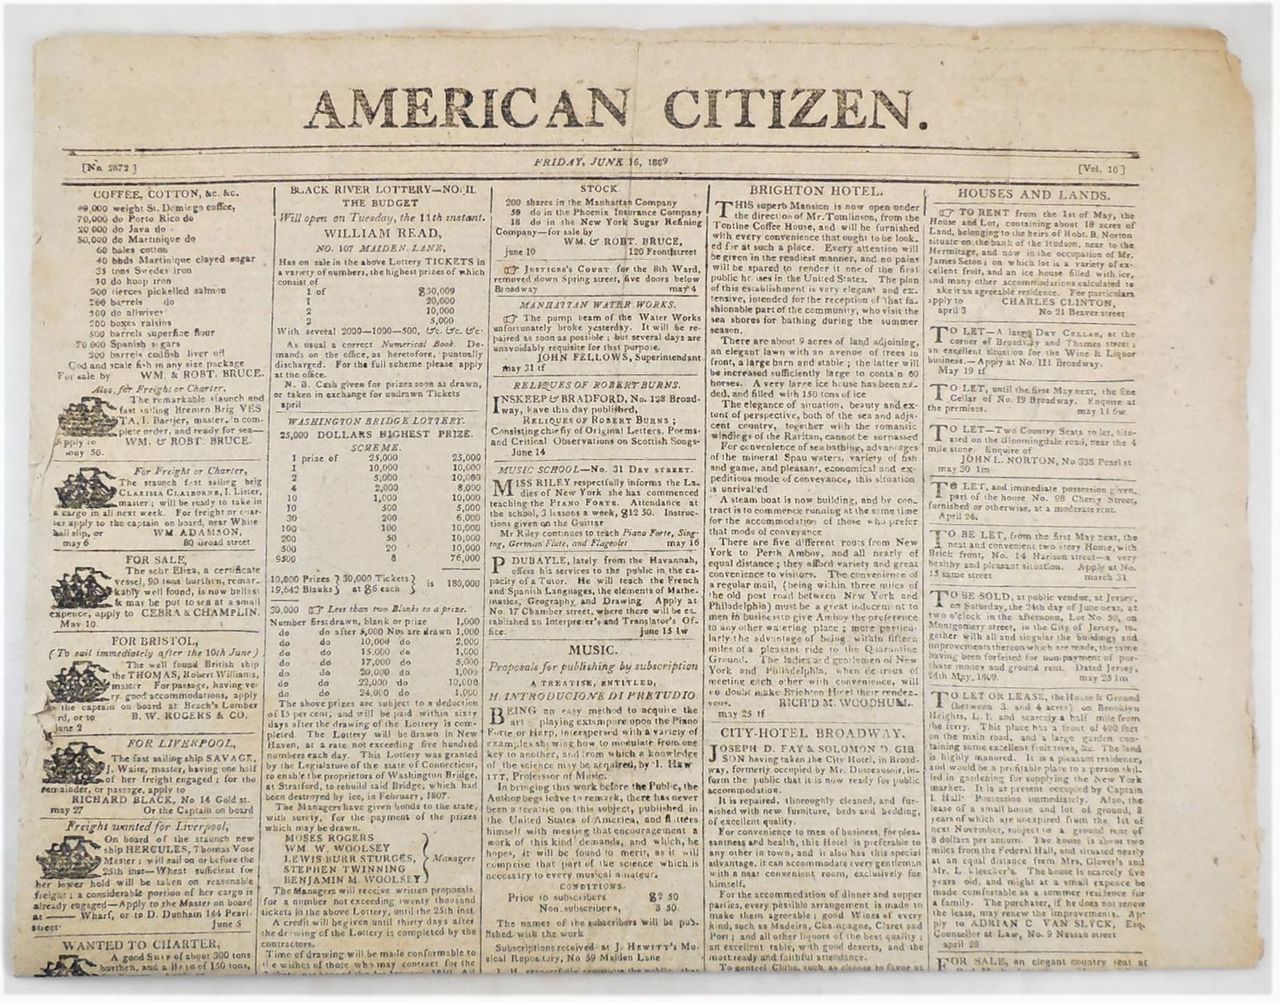 AMERICAN CITIZEN NEWSPAPER With Slave Ad - 1809